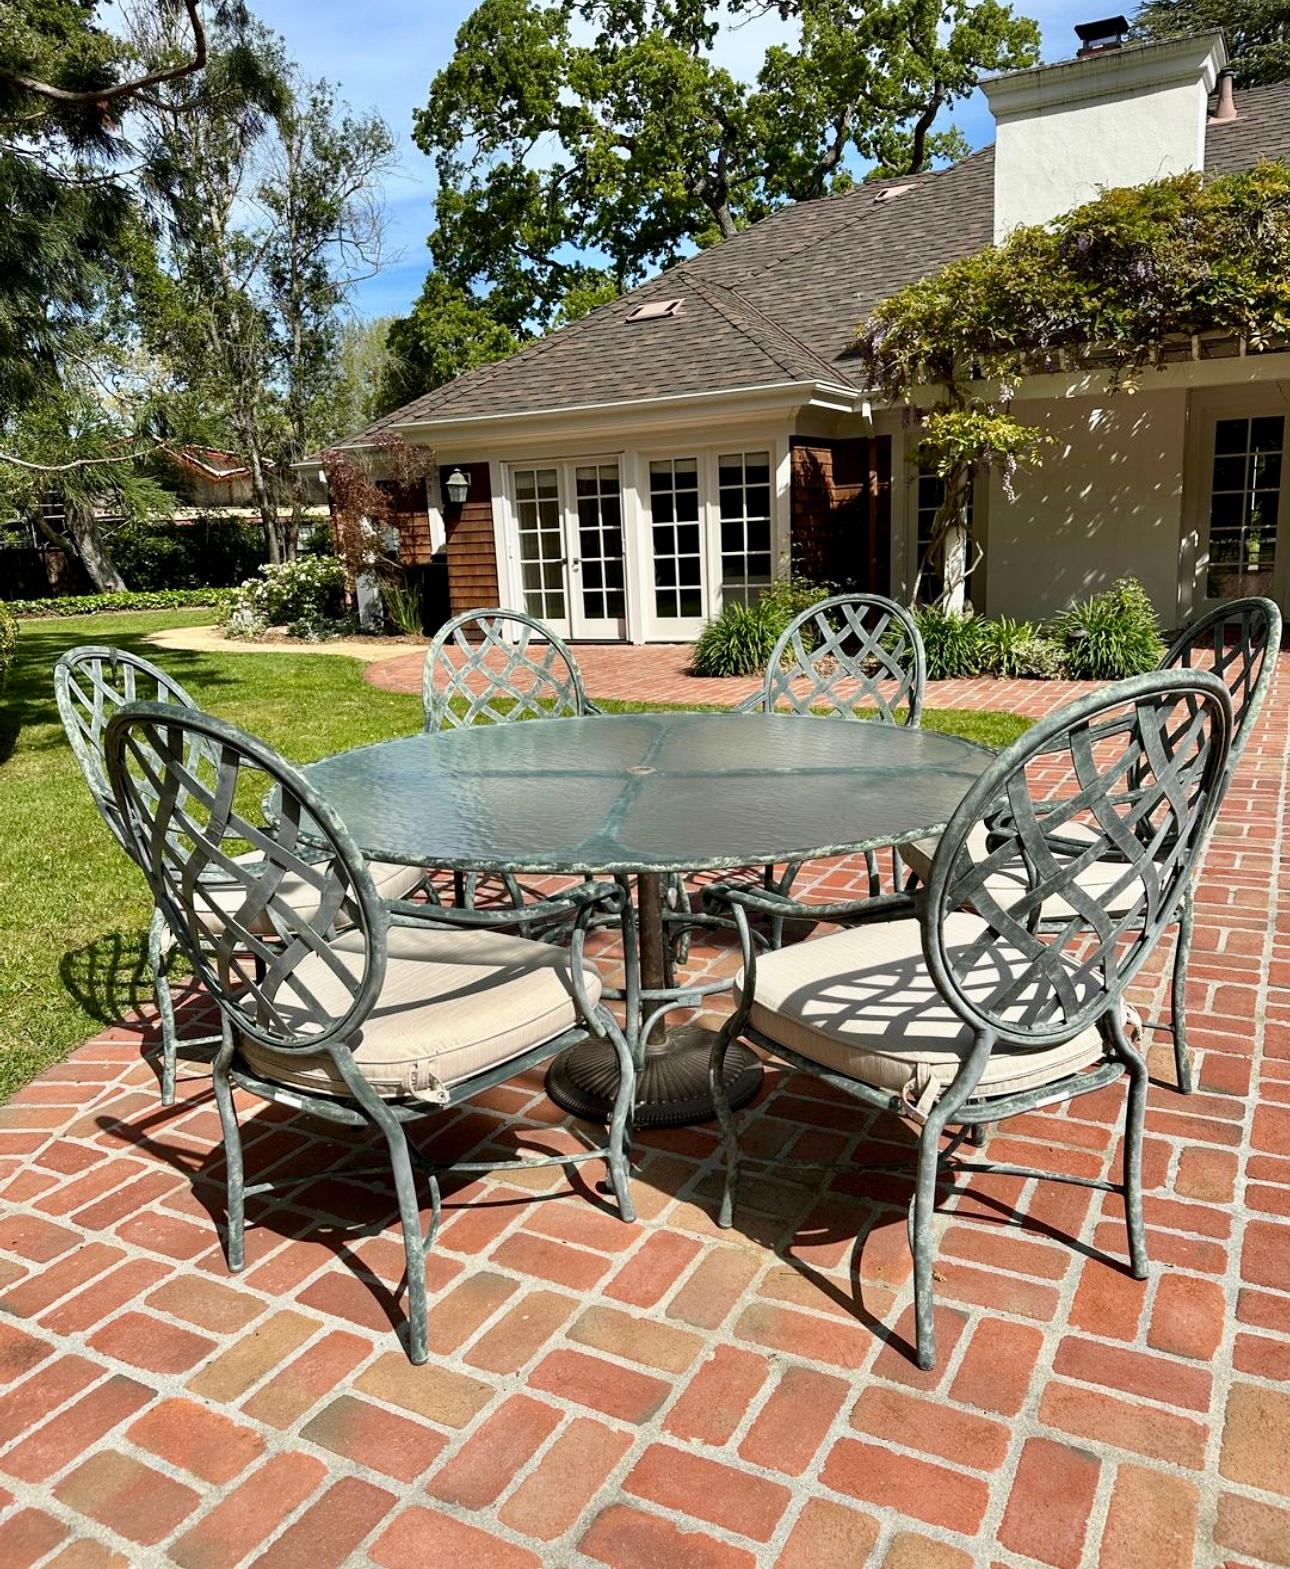 A beautiful outdoor patio furniture by famous manufacturer Brown Jordan
Round glass top table and 6 Armchairs with matching used cushions plus umbrella base
Table measures 60.5 inches in diameter with center umbrella hole and 28” height 

Chair